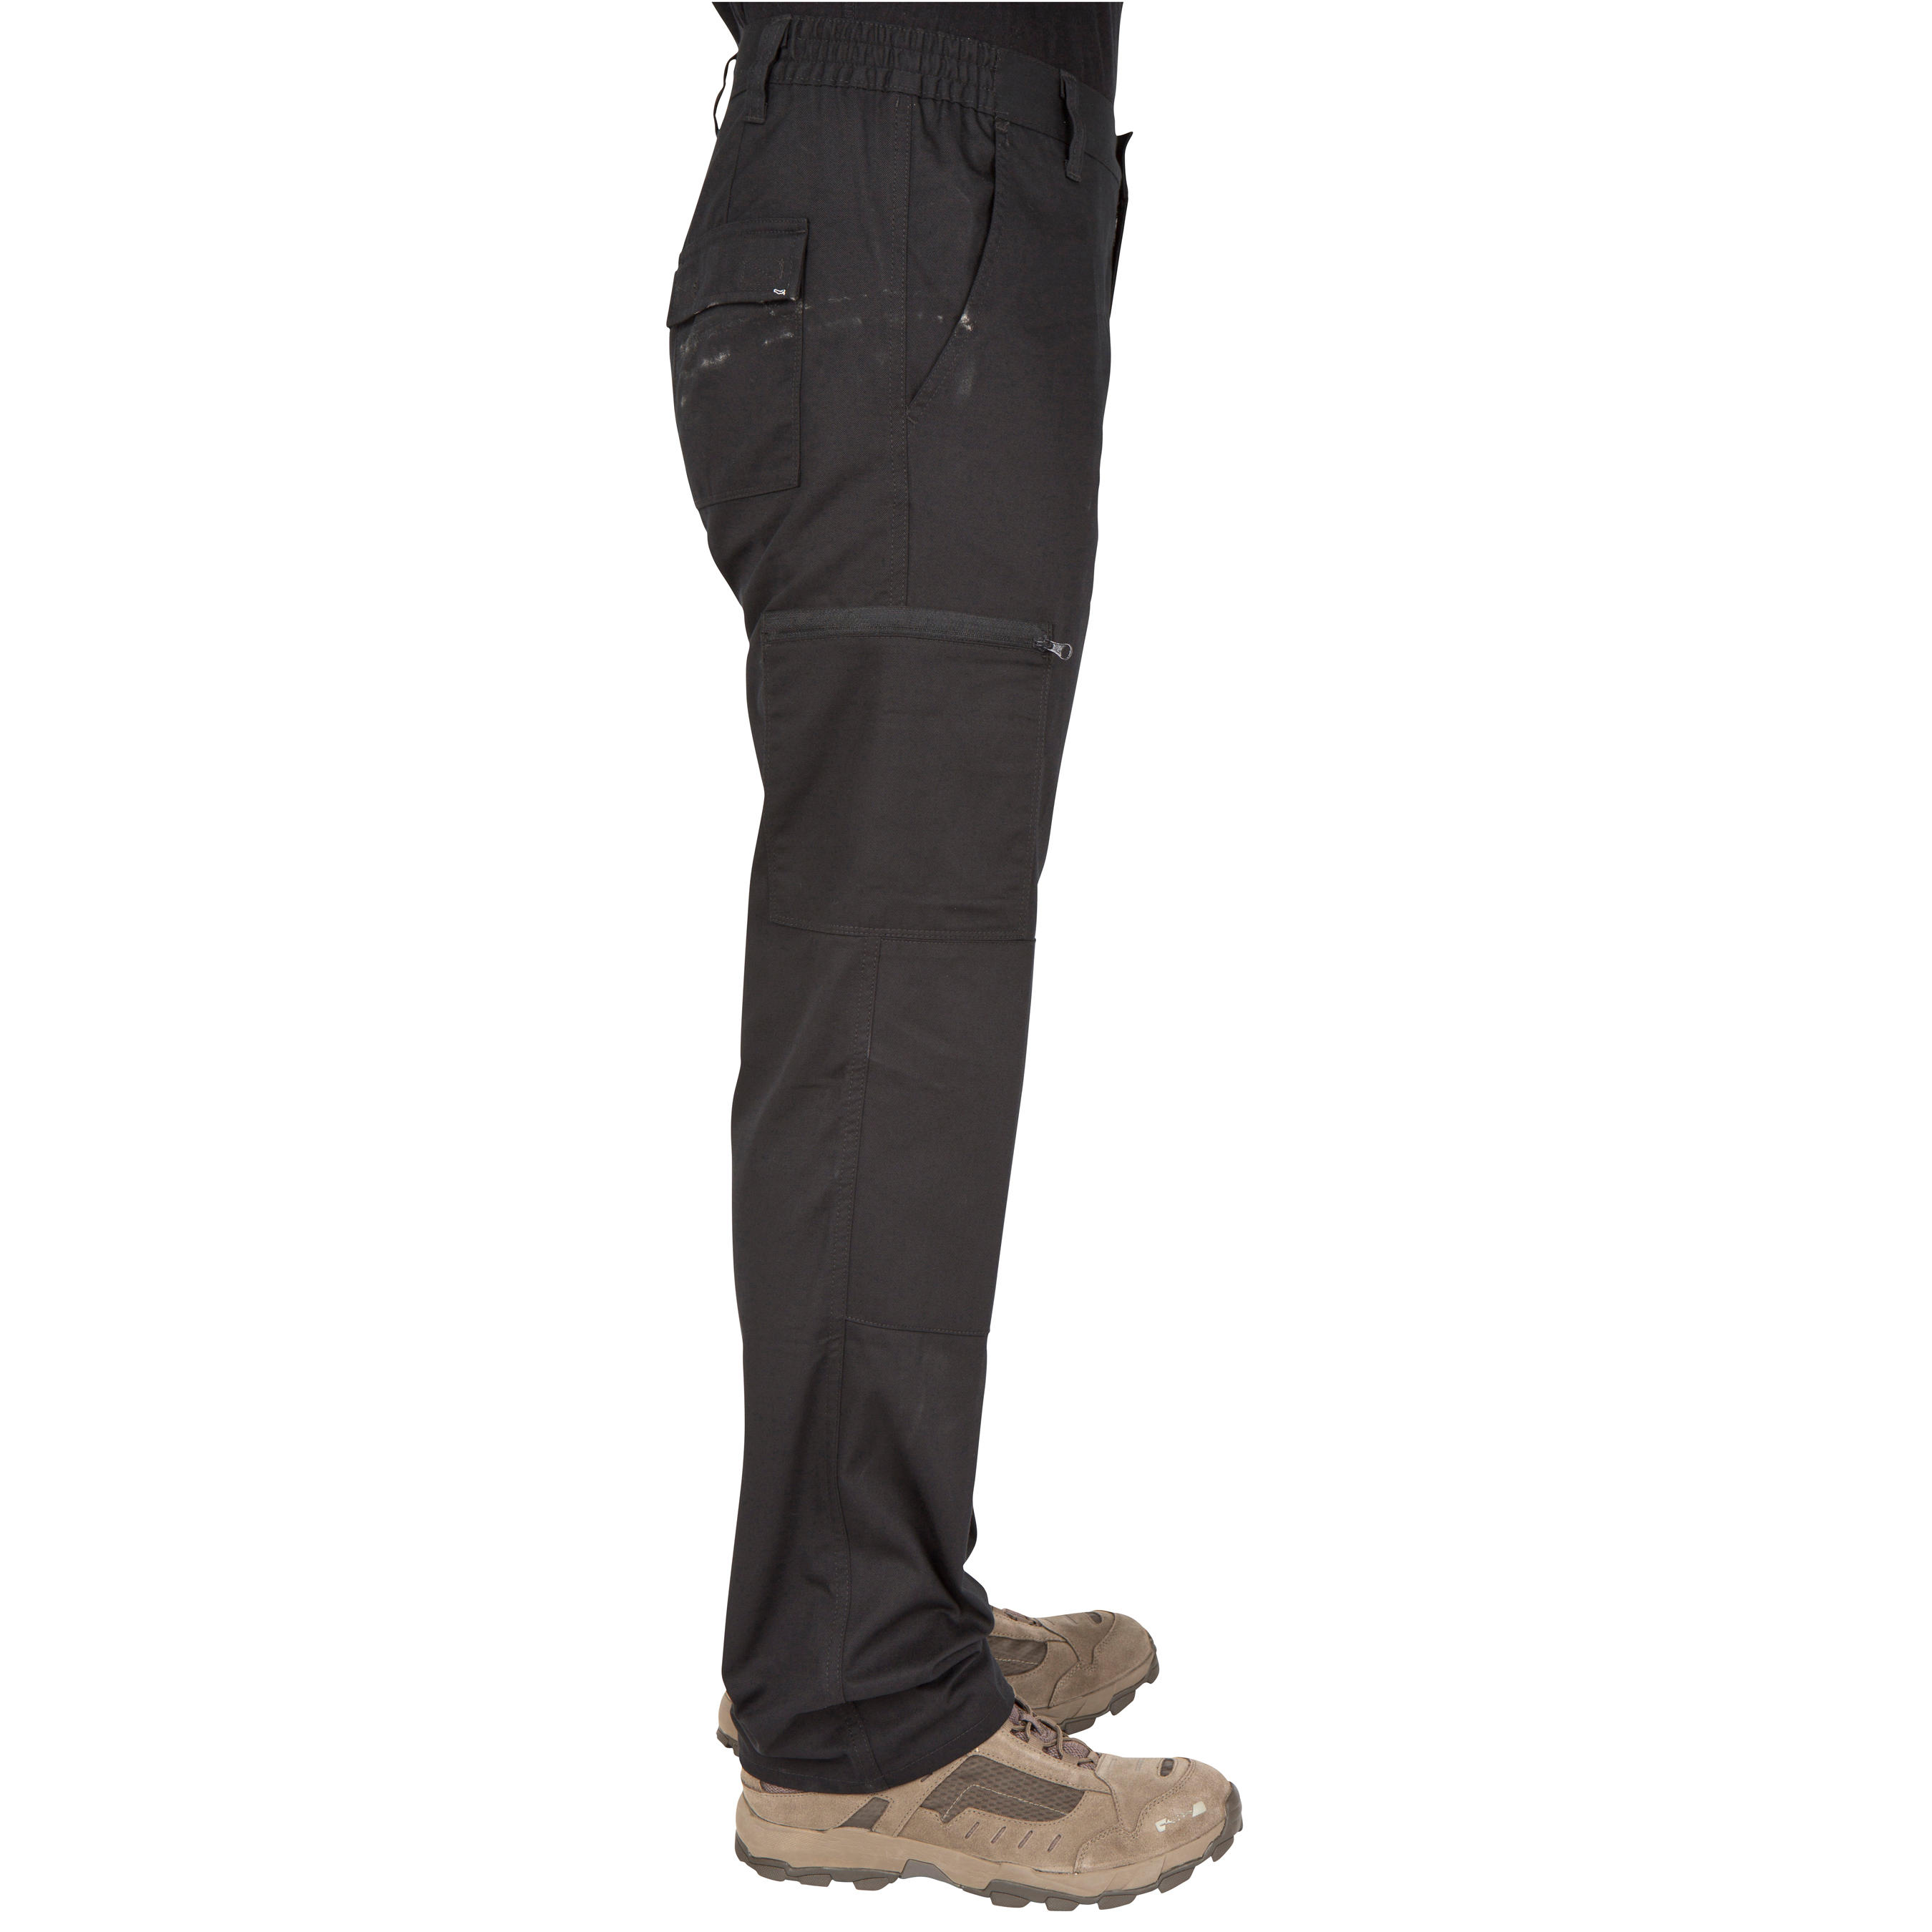 Stone Island mens cargo trousers in cotton Navy  Buy online at the best  price on caposeriocom